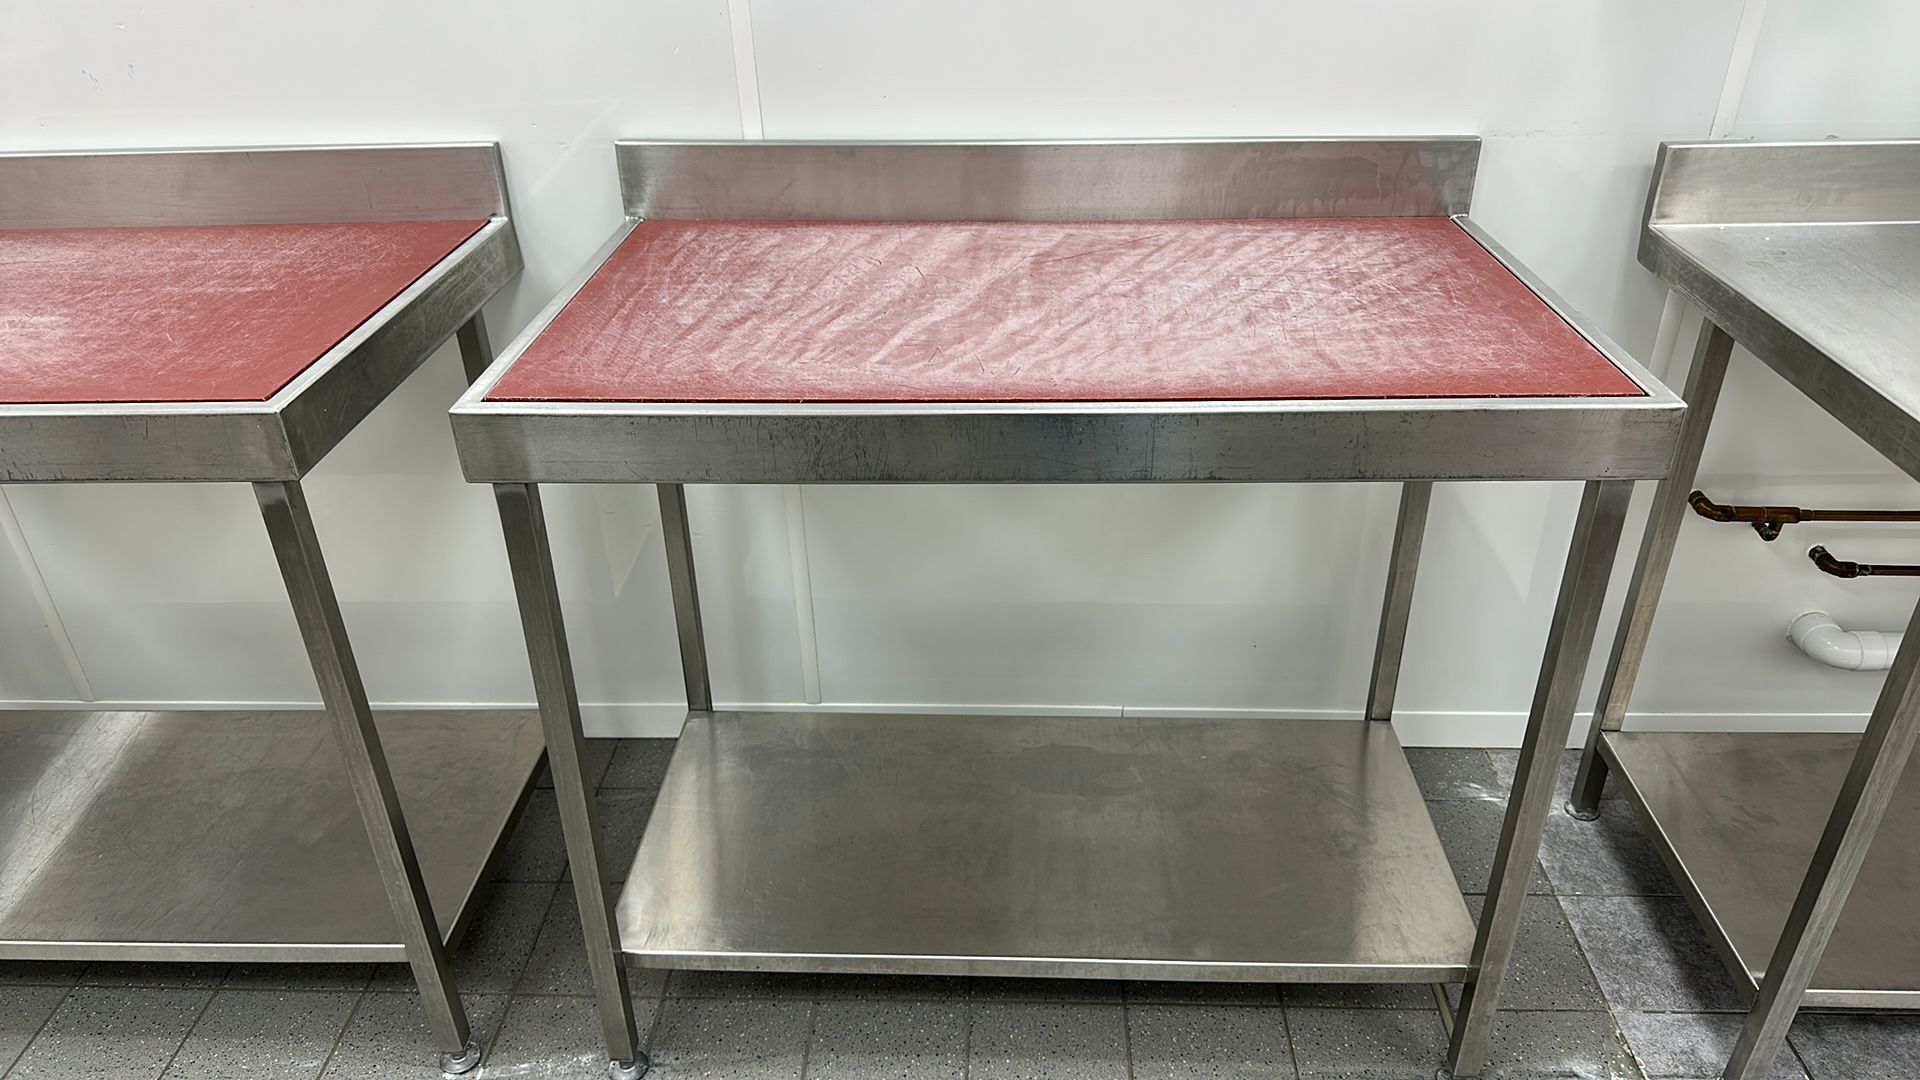 Stainless Steel Counter Worktop with chopping board